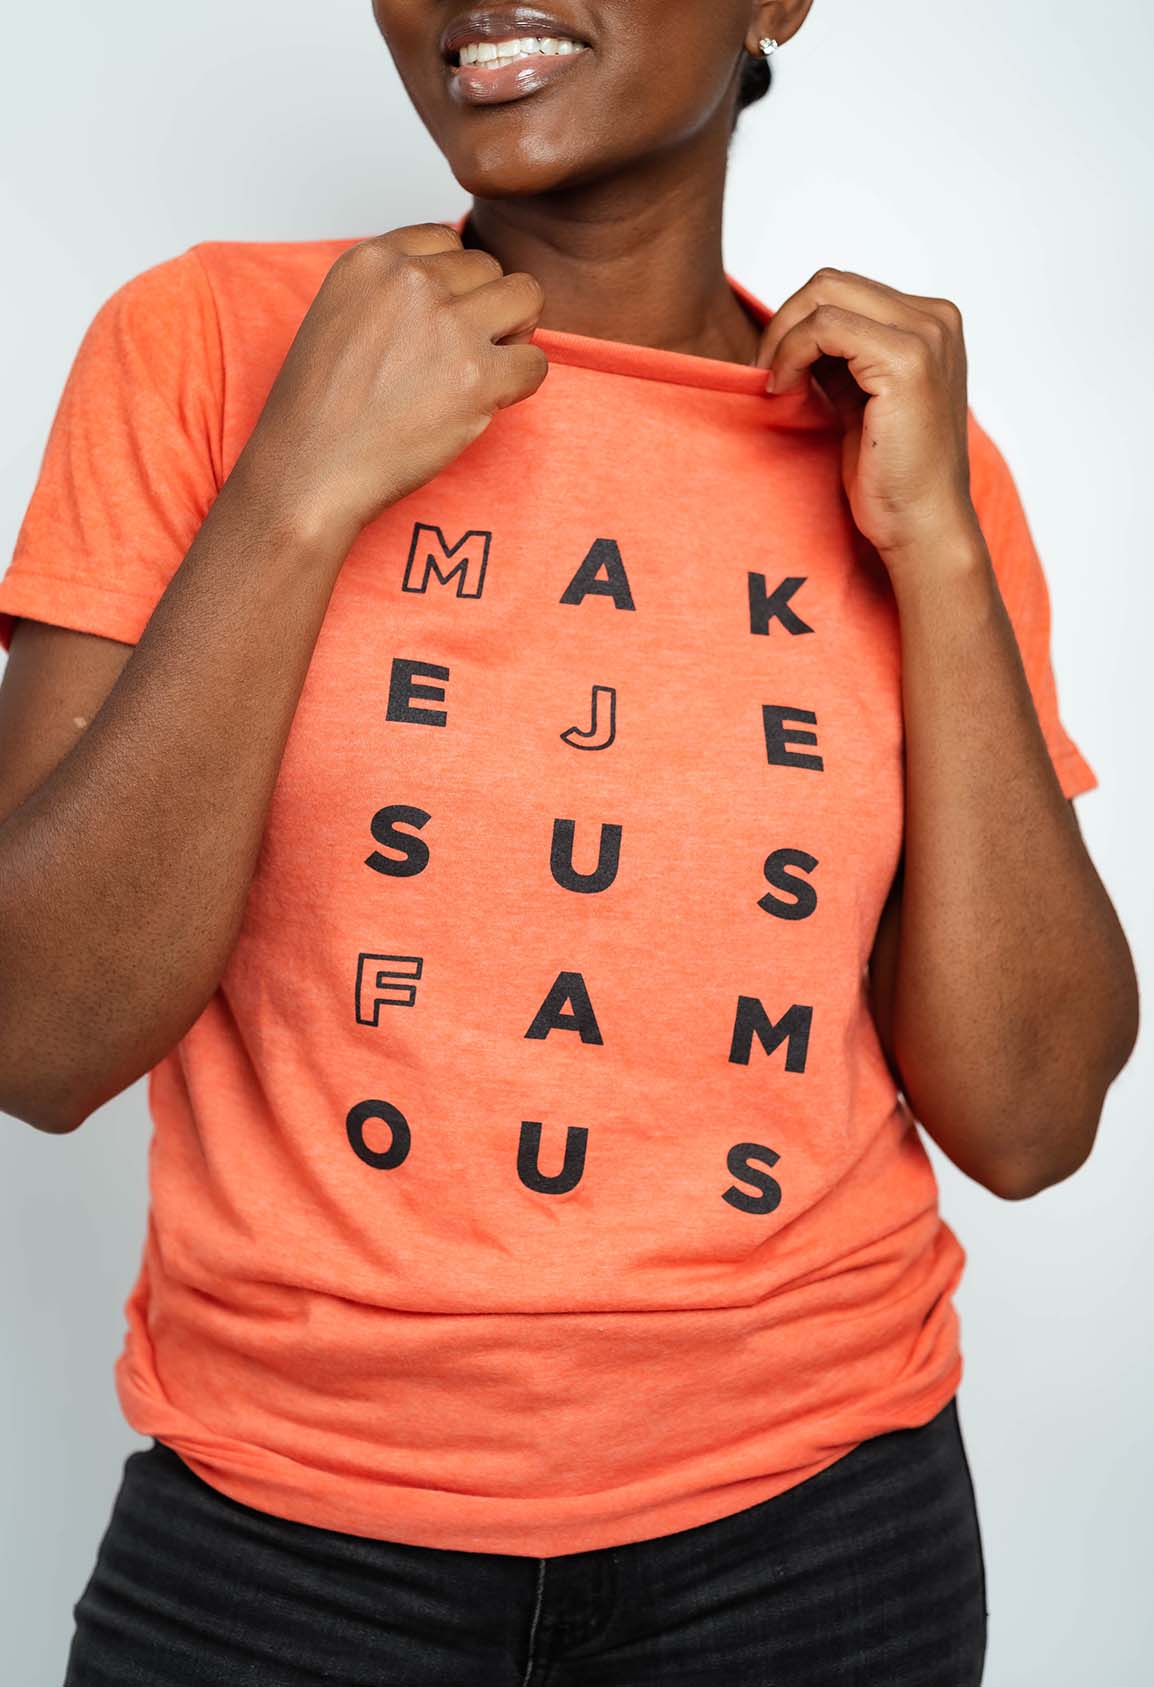 FrshFaith: Make Jesus Famous Eye Chart, drawing a focus to your faith and love for Jesus Christ.